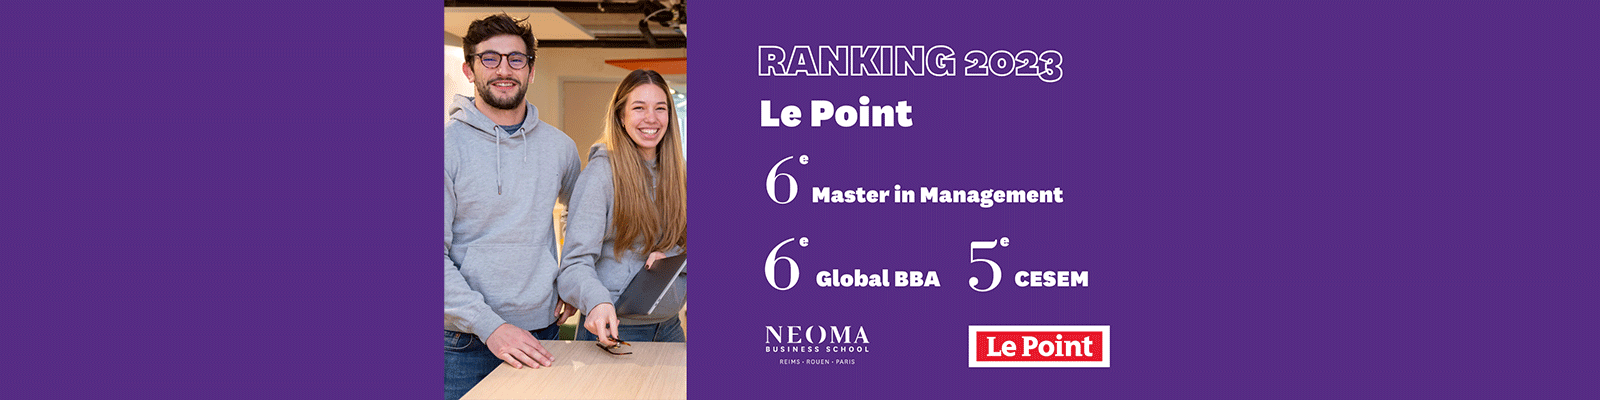 NEOMA-6th-Le-Point-ranking-2023